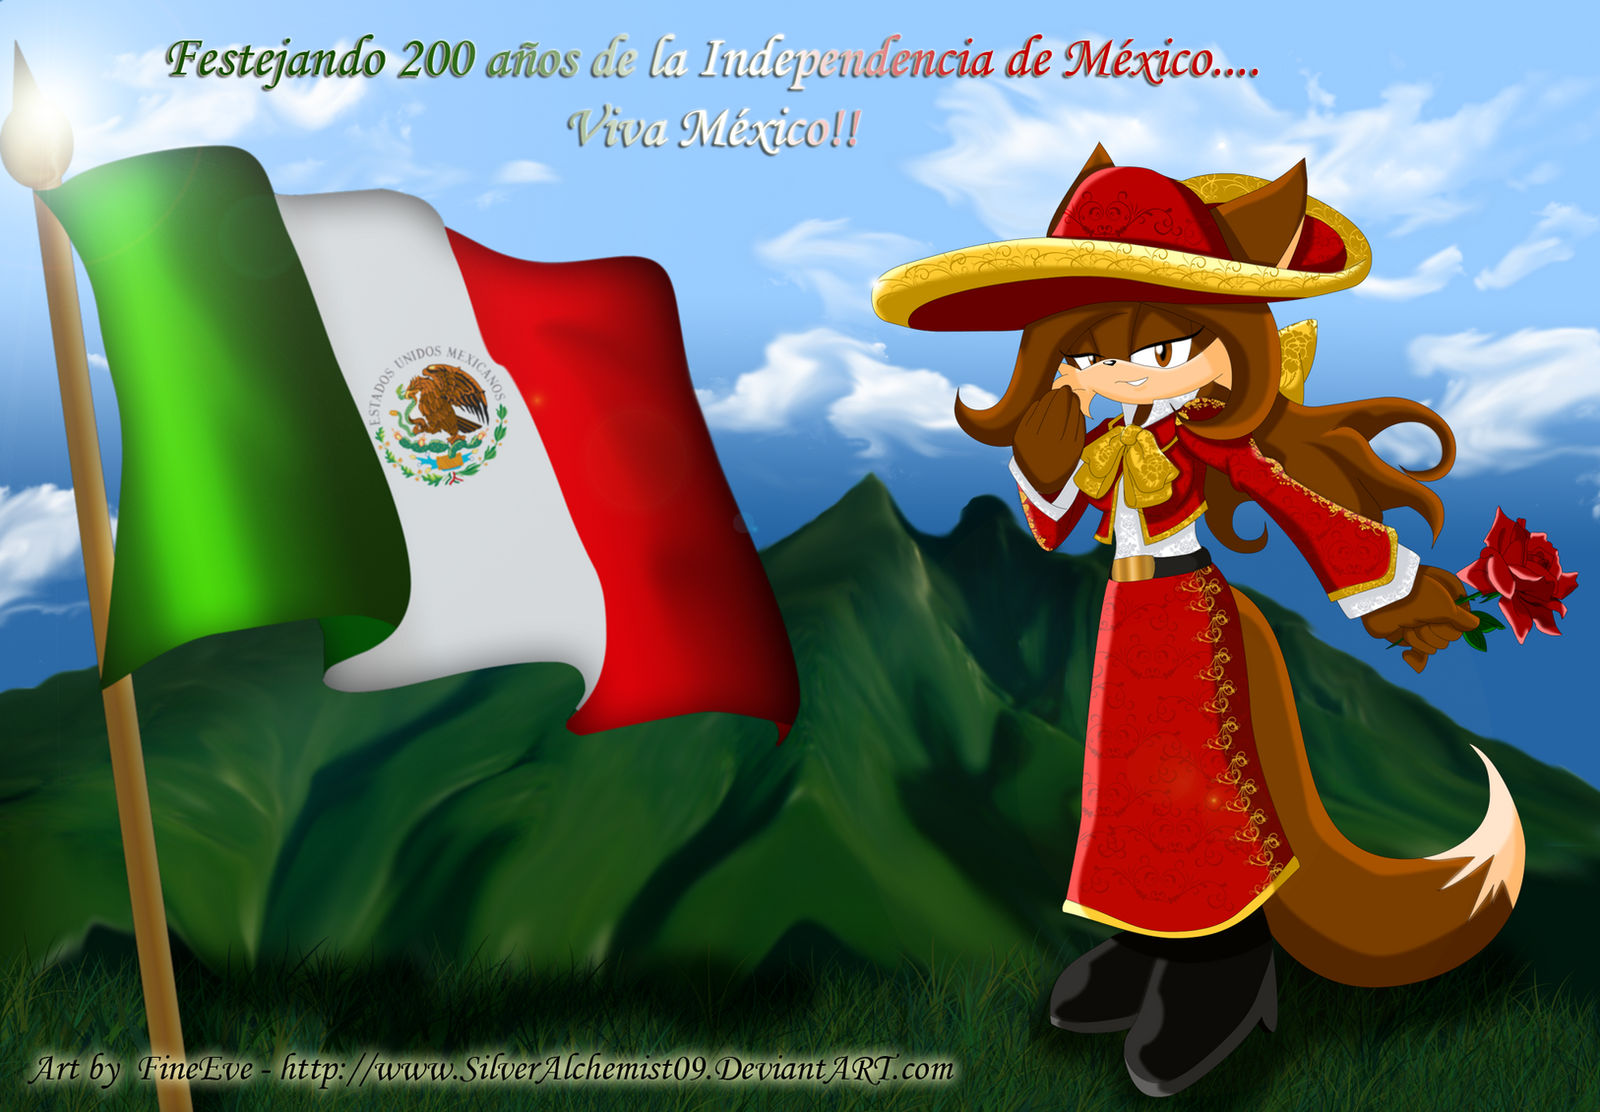 FineEve-Independencia d Mexico by SilverAlchemist09 on DeviantArt